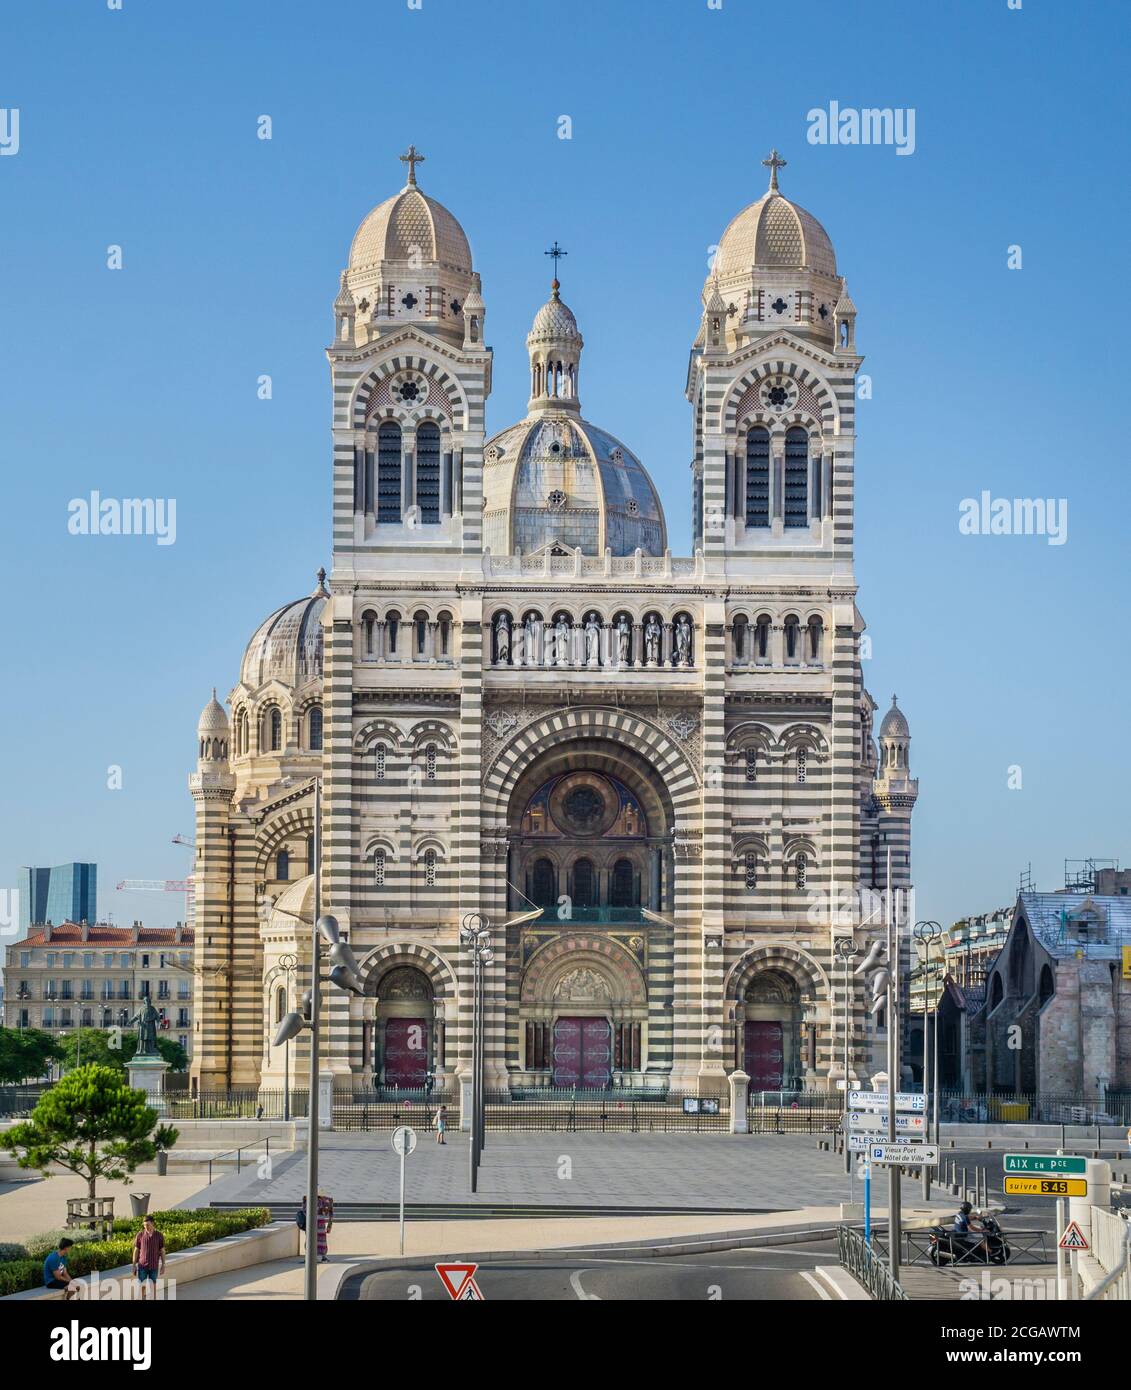 view of the Romanesque-Byzantine Revival Marseille Cathedral or Cathedral of Saint Mary Major, Marseille, Bouches-du-Rhône department, France Stock Photo